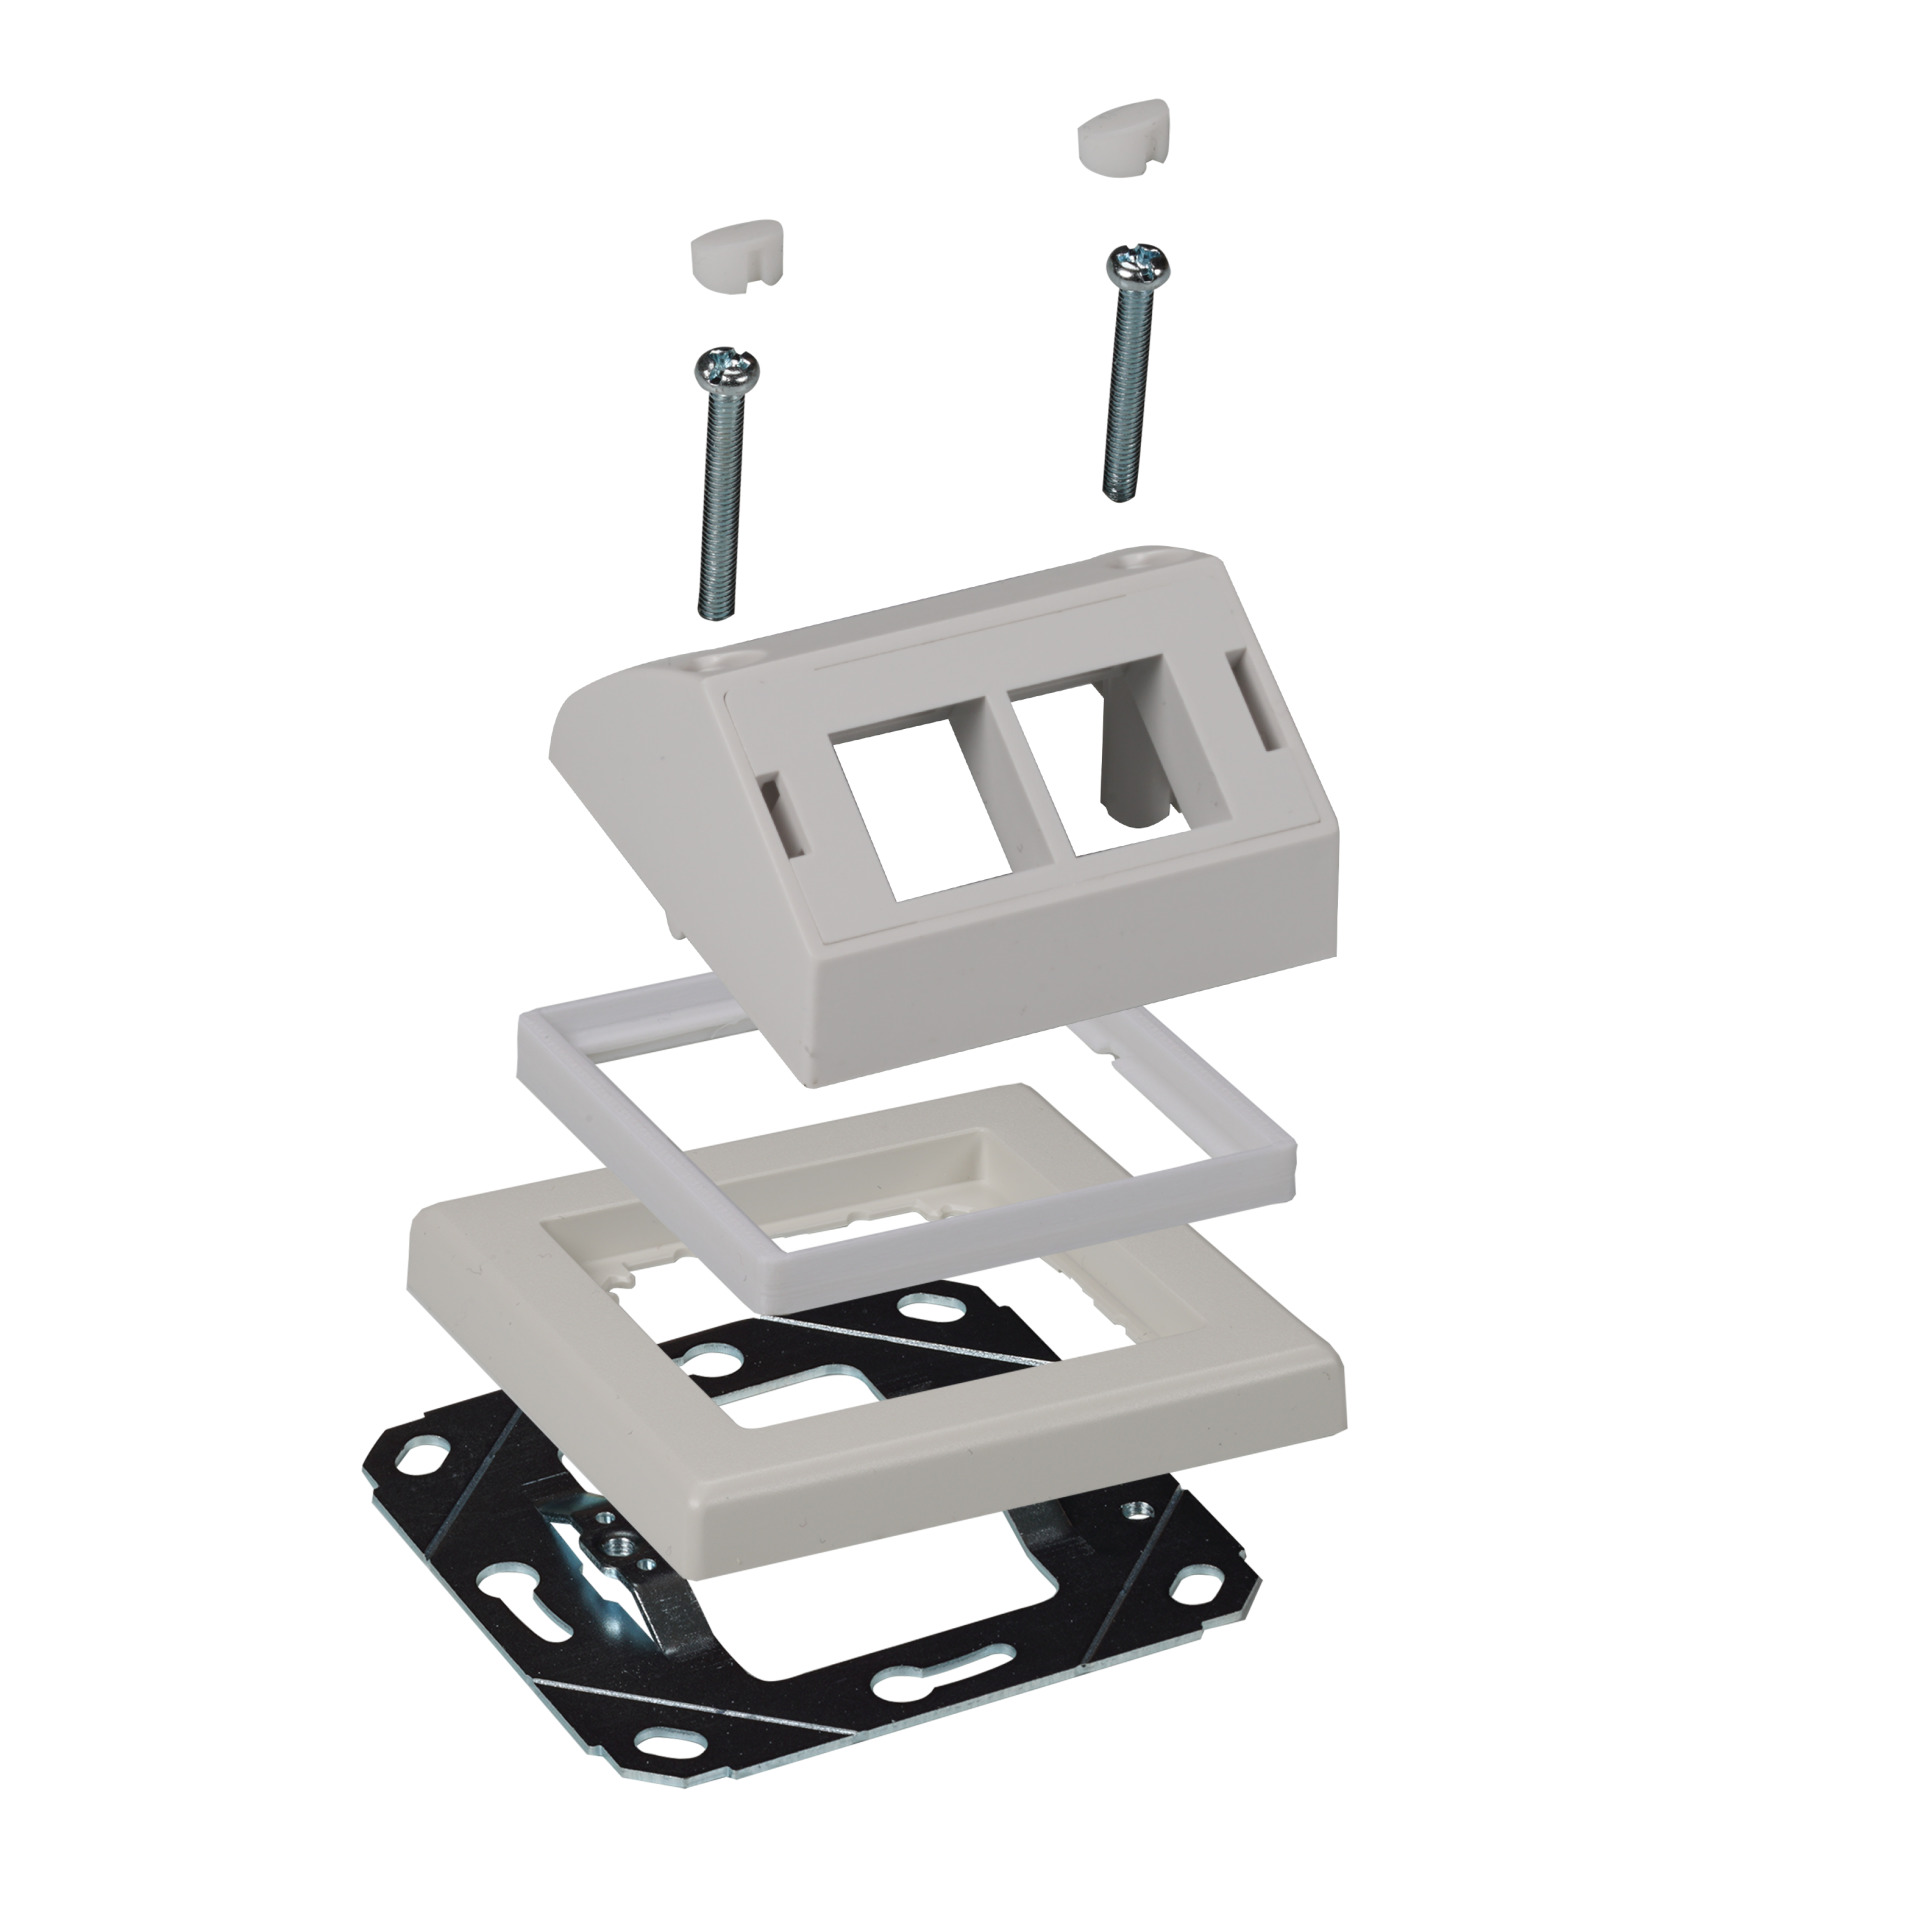 Adapter frame design compatibility with Merten, RAL9003